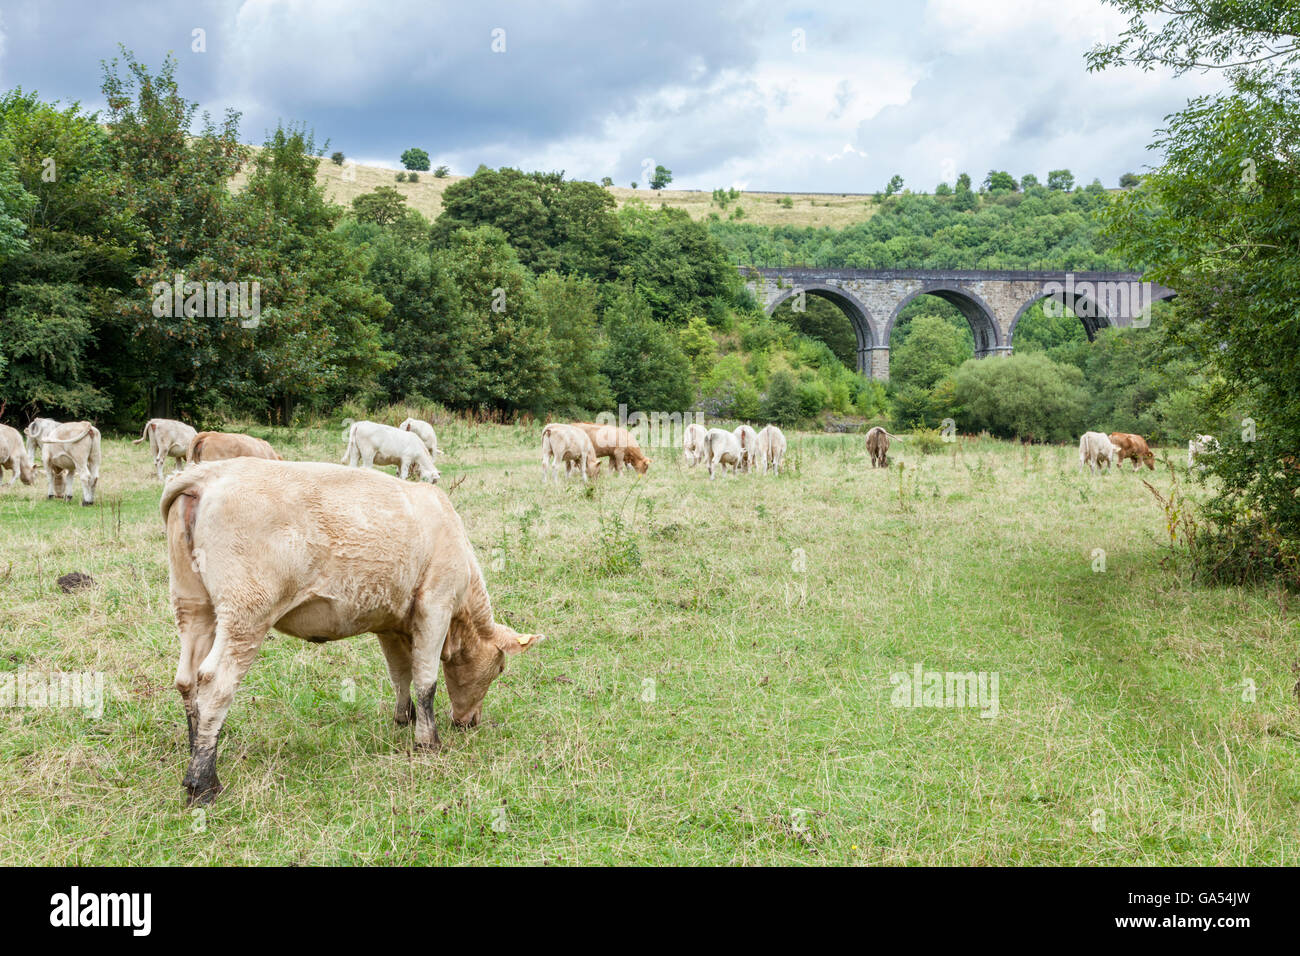 Cows grazing in a field at Monsal Dale in the Derbyshire countryside, England, UK. In the distance is Headstone Viaduct. Stock Photo